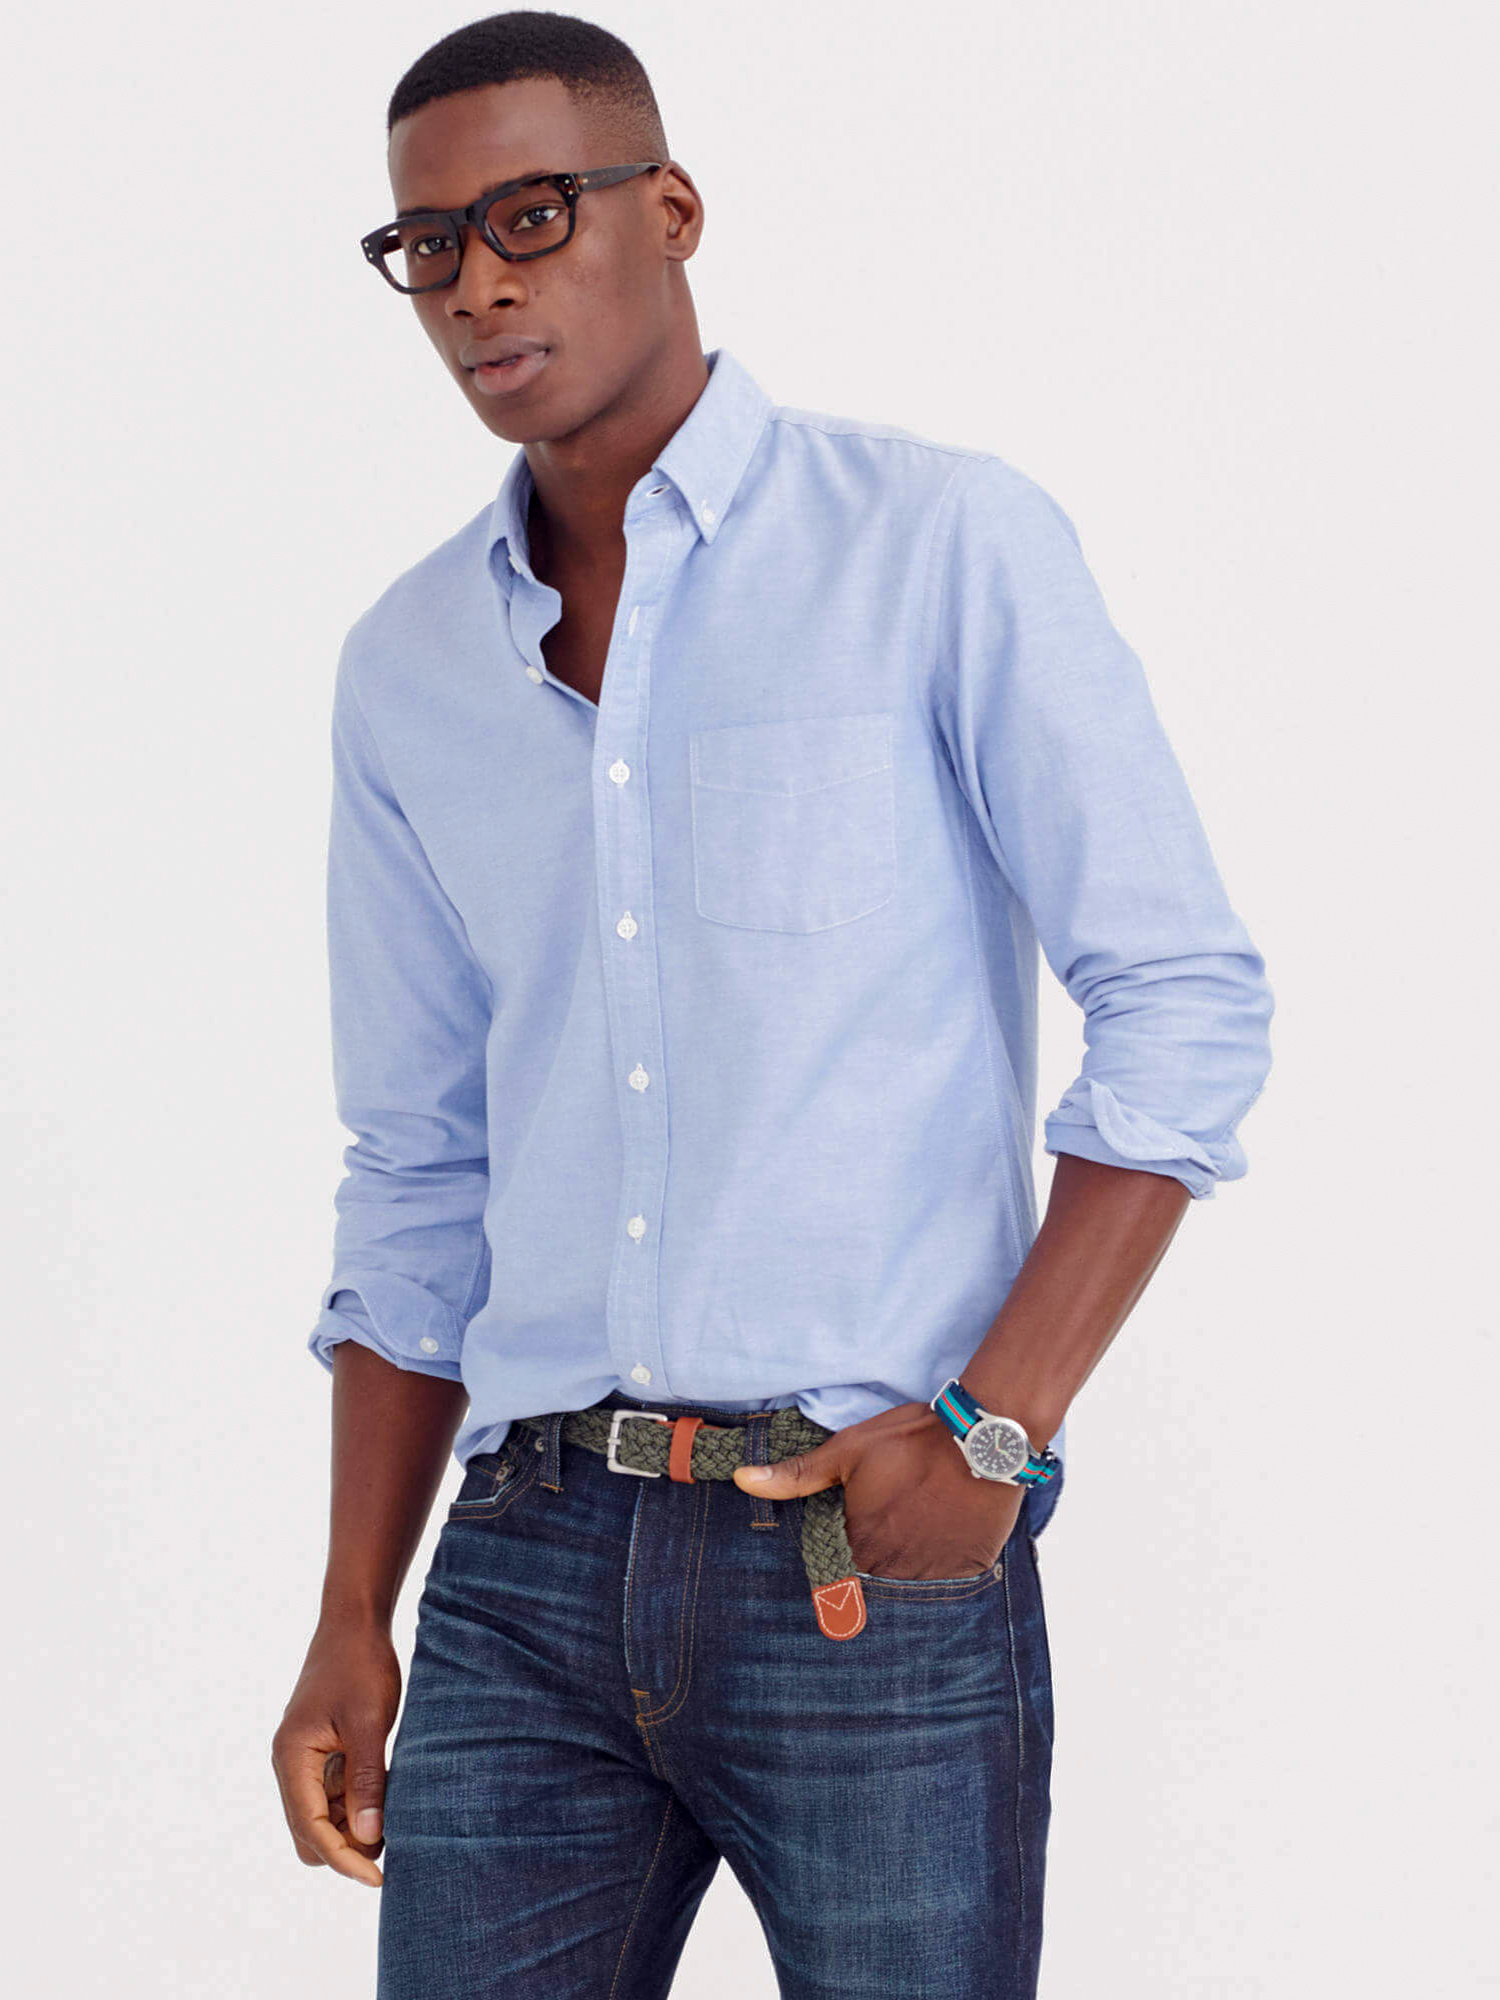 Button-down dress shirt and dark blue jeans outfit